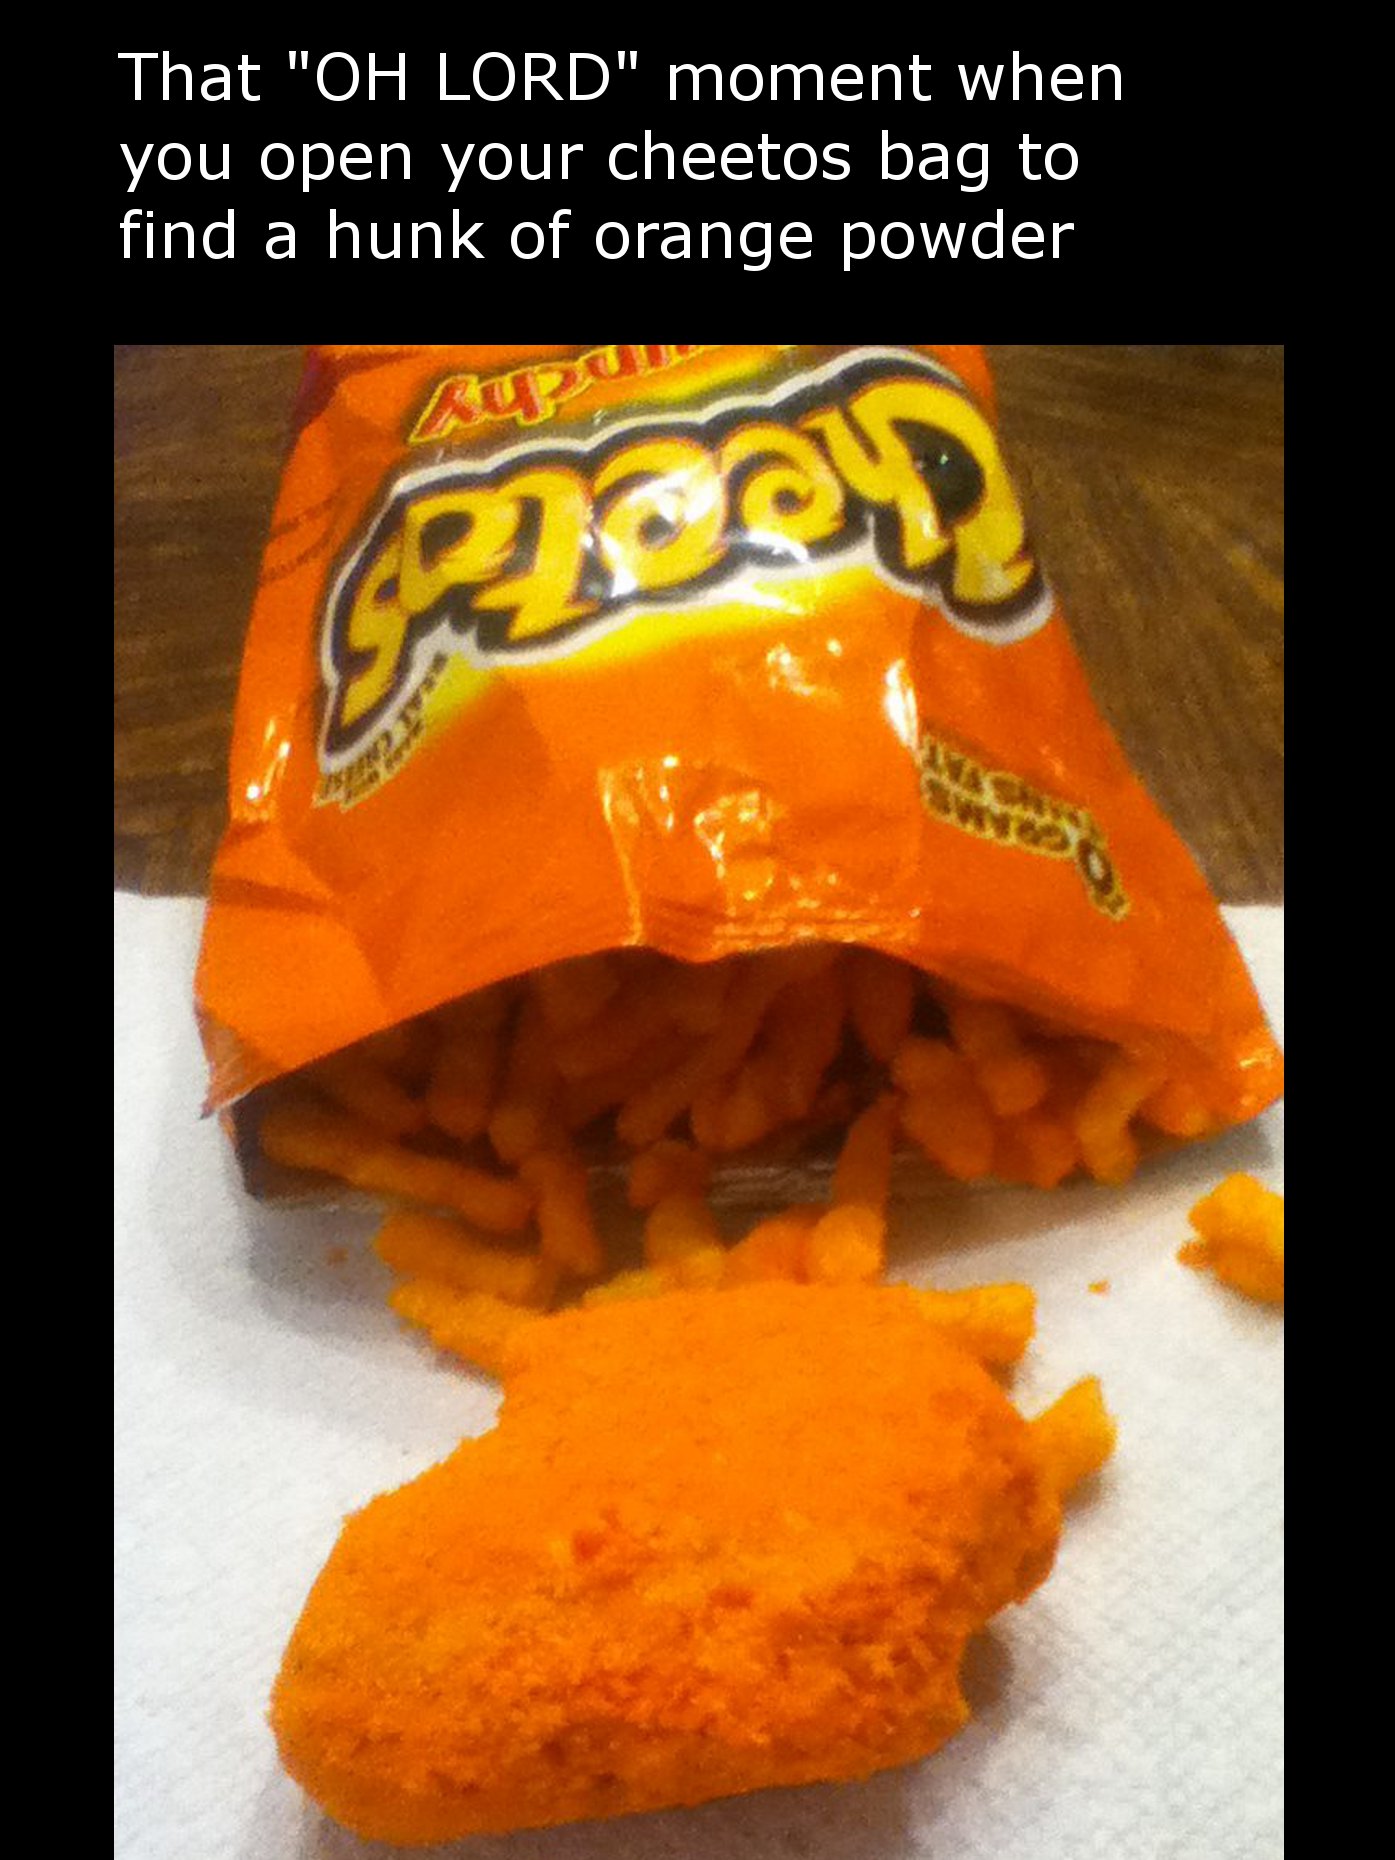 open cheetos bag - That "Oh Lord" moment when you open your cheetos bag to find a hunk of orange powder